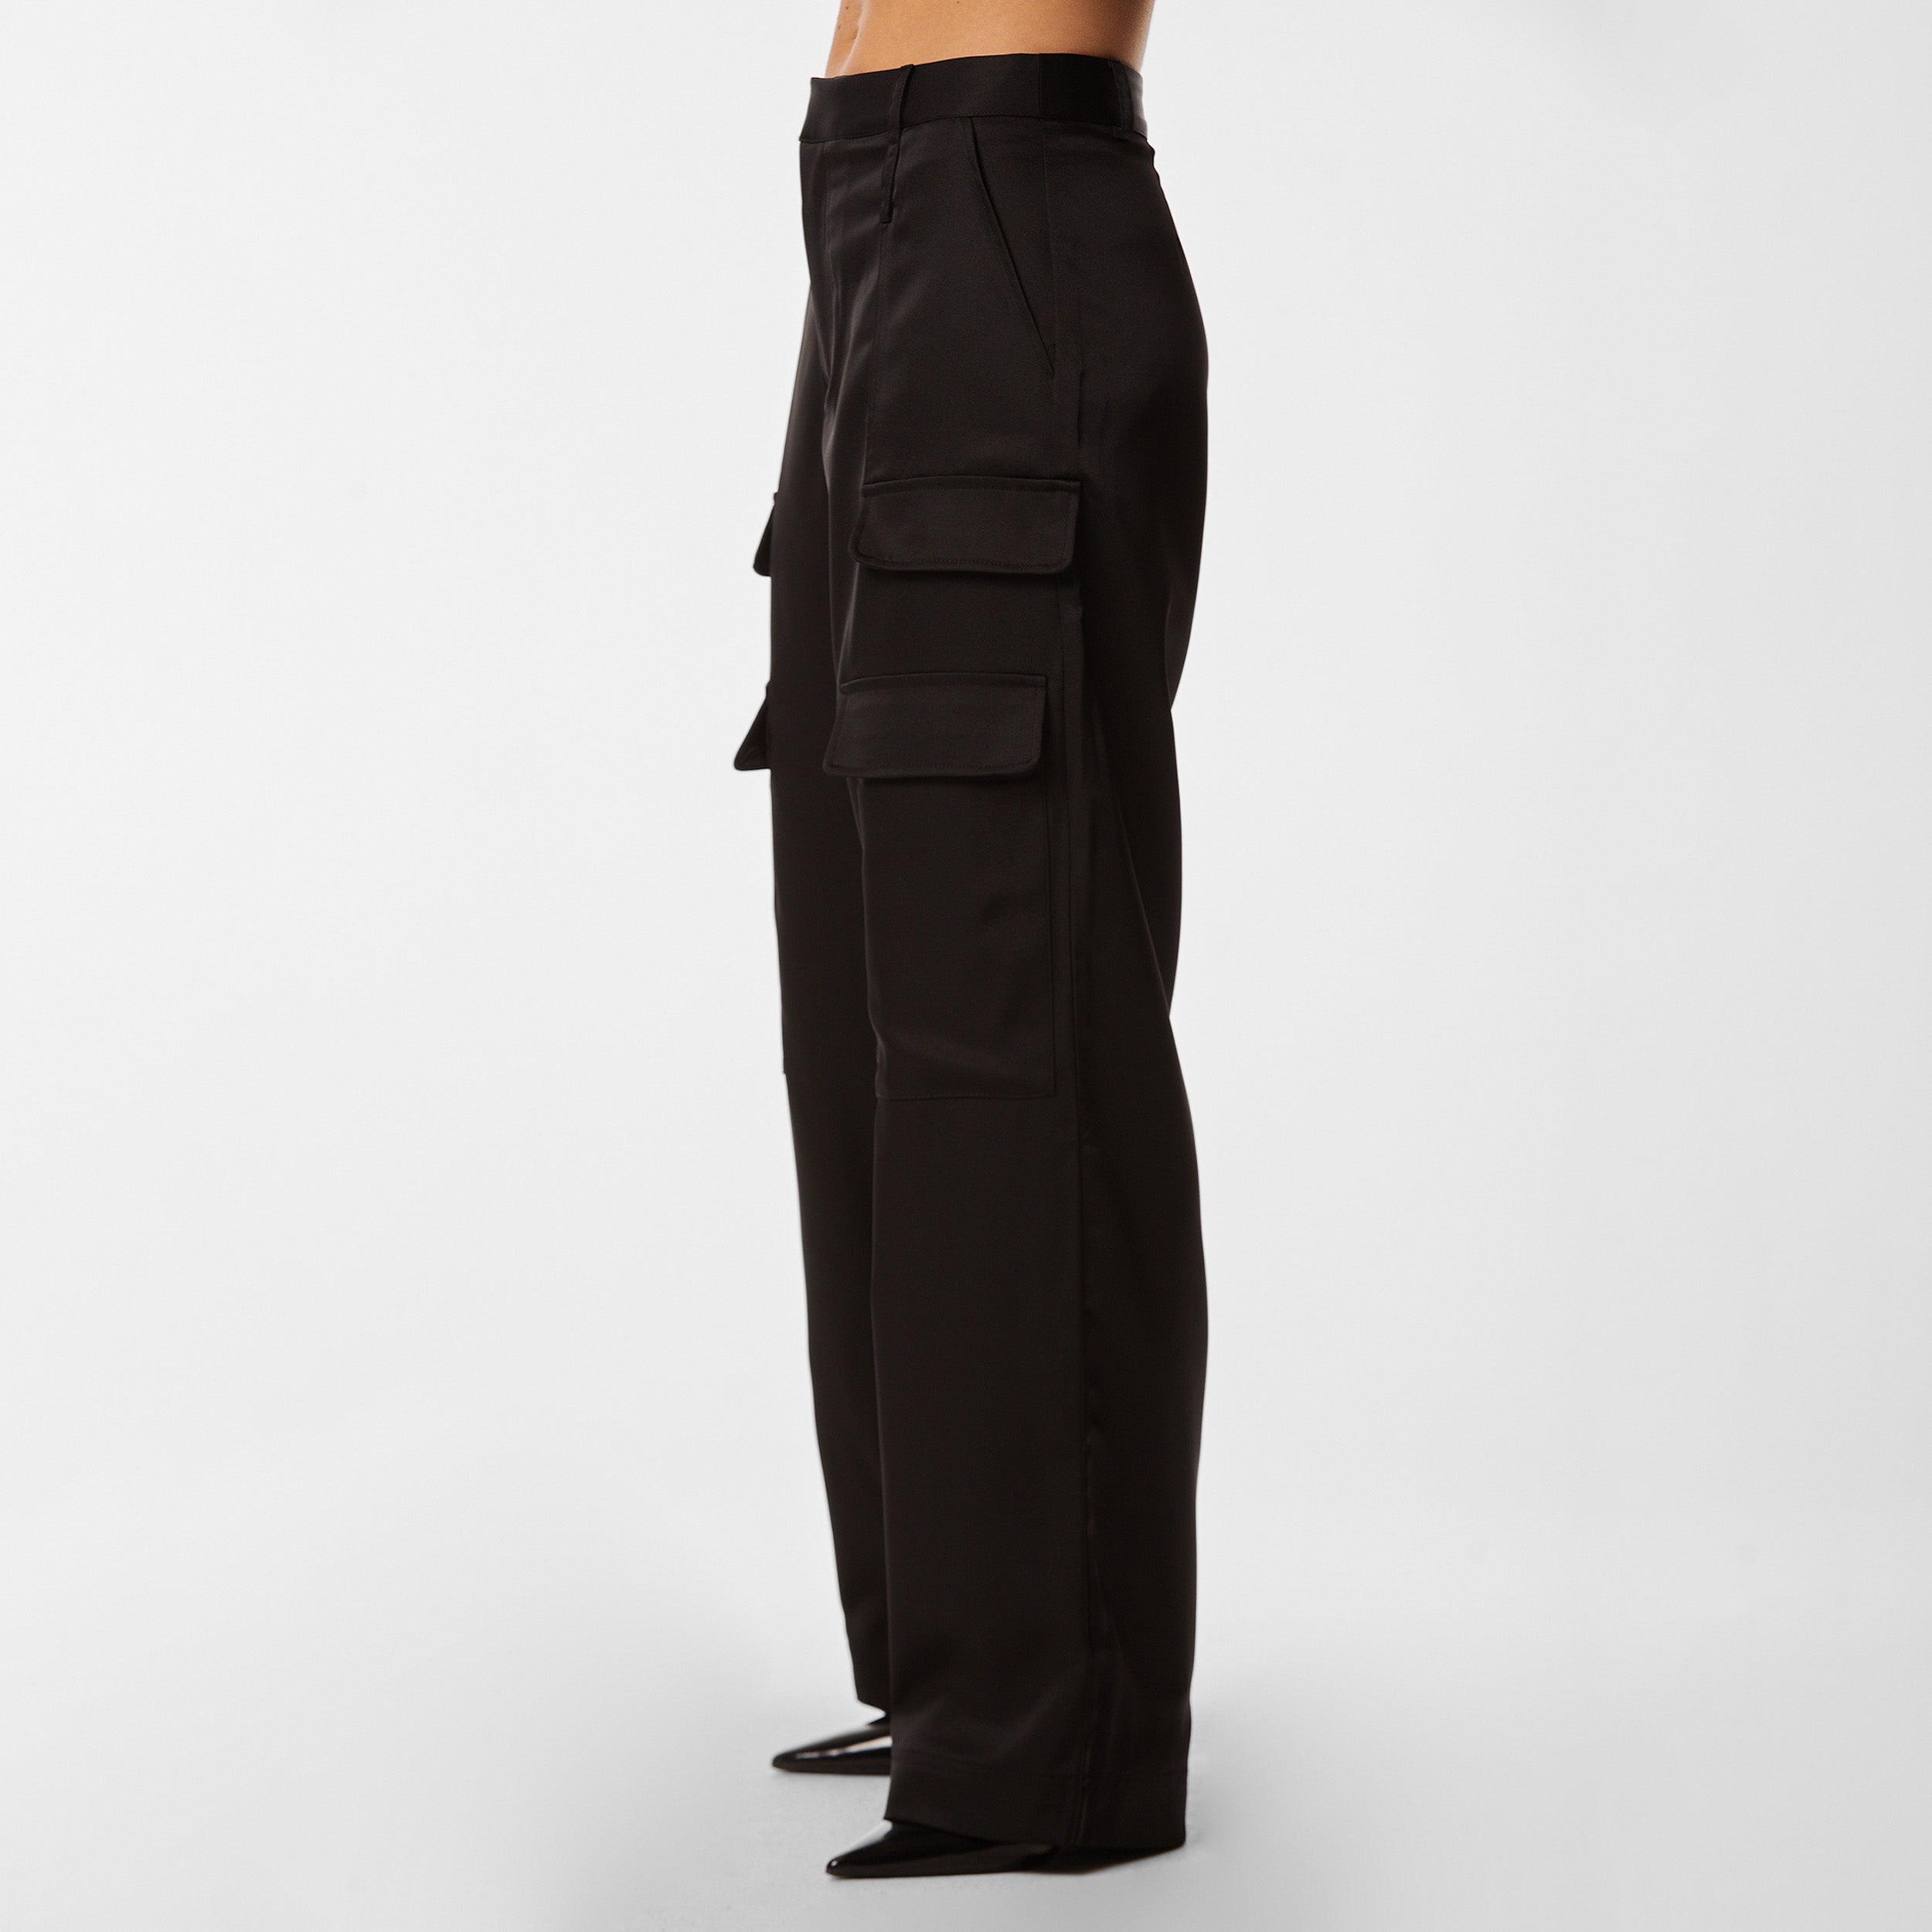 Side view of woman wearing Black Satin Milan Pant features Mid-rise with side pockets and cargo detail. Luxurious and structured satin-like fabric. 